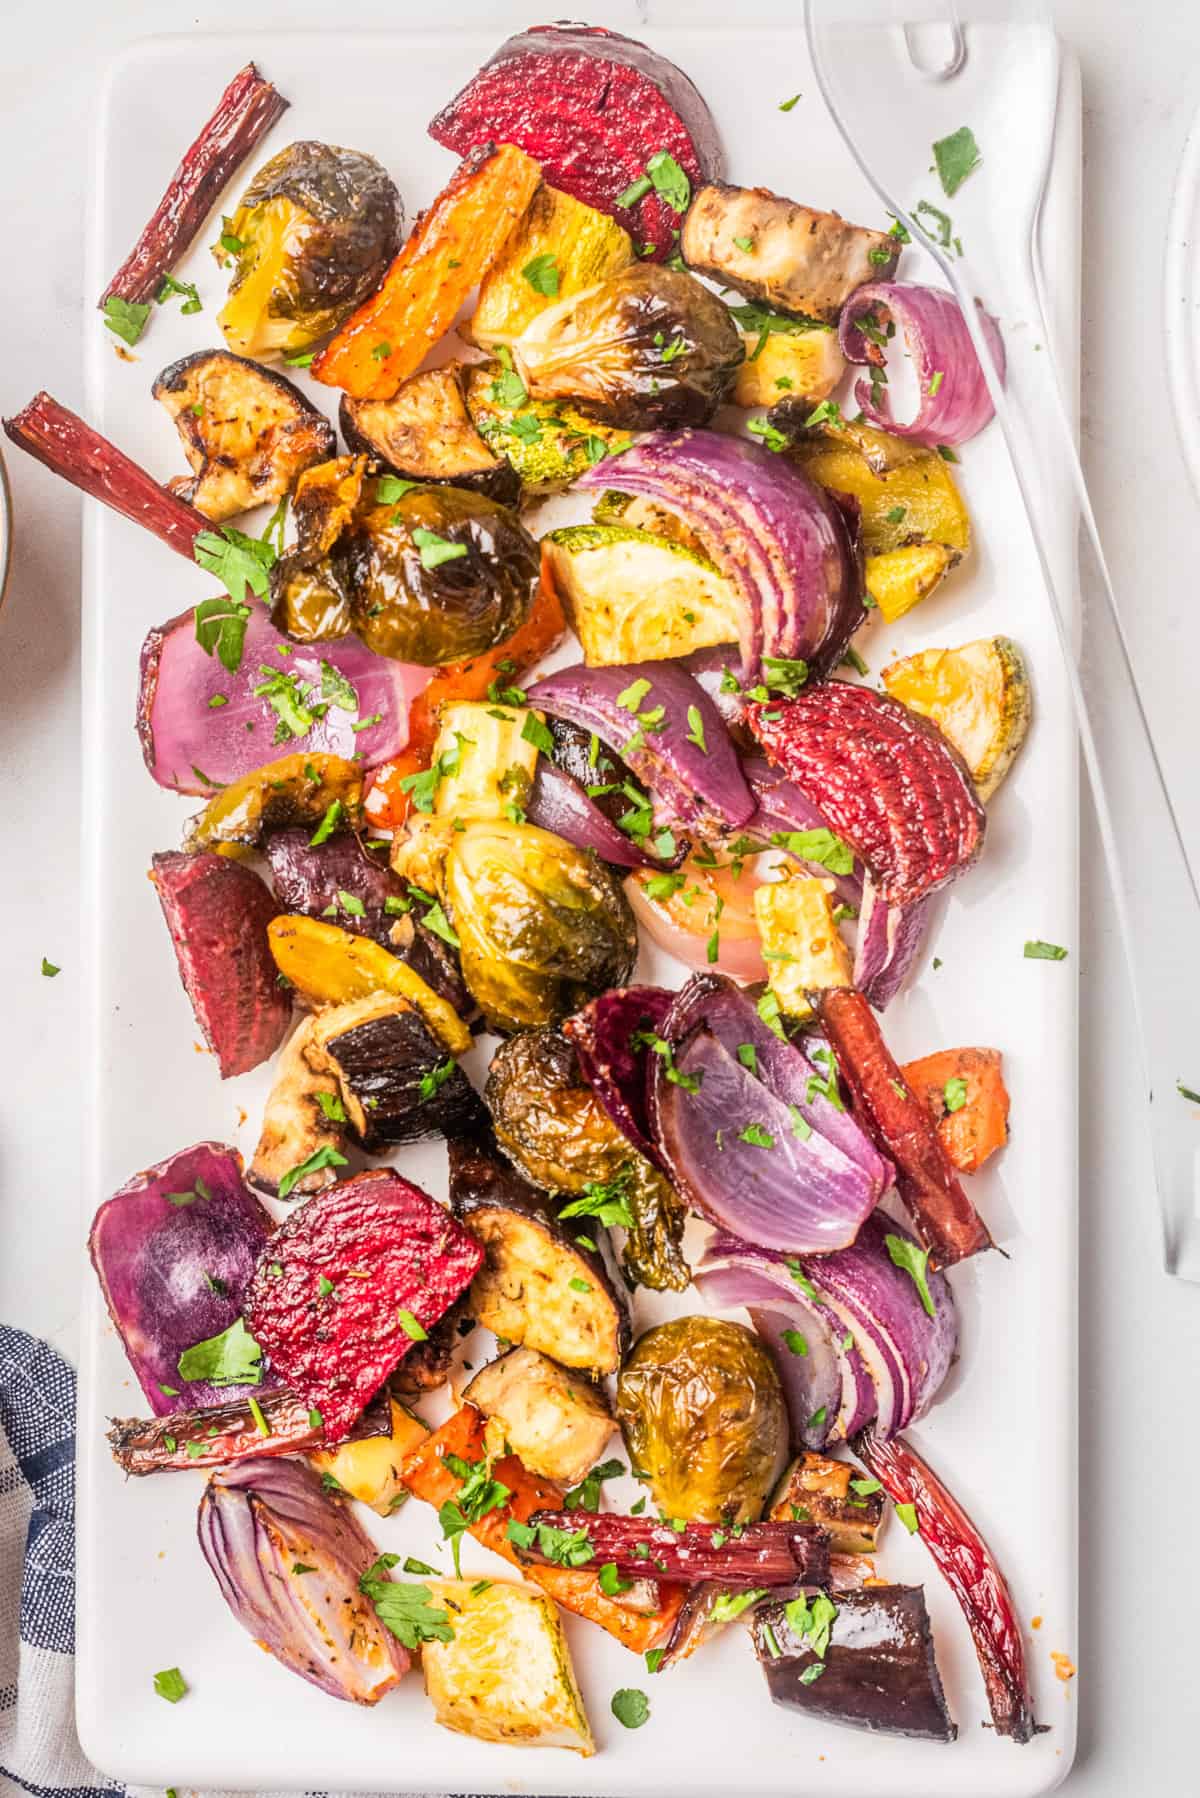 An overhead image of roasted vegetable salad on a serving dish.